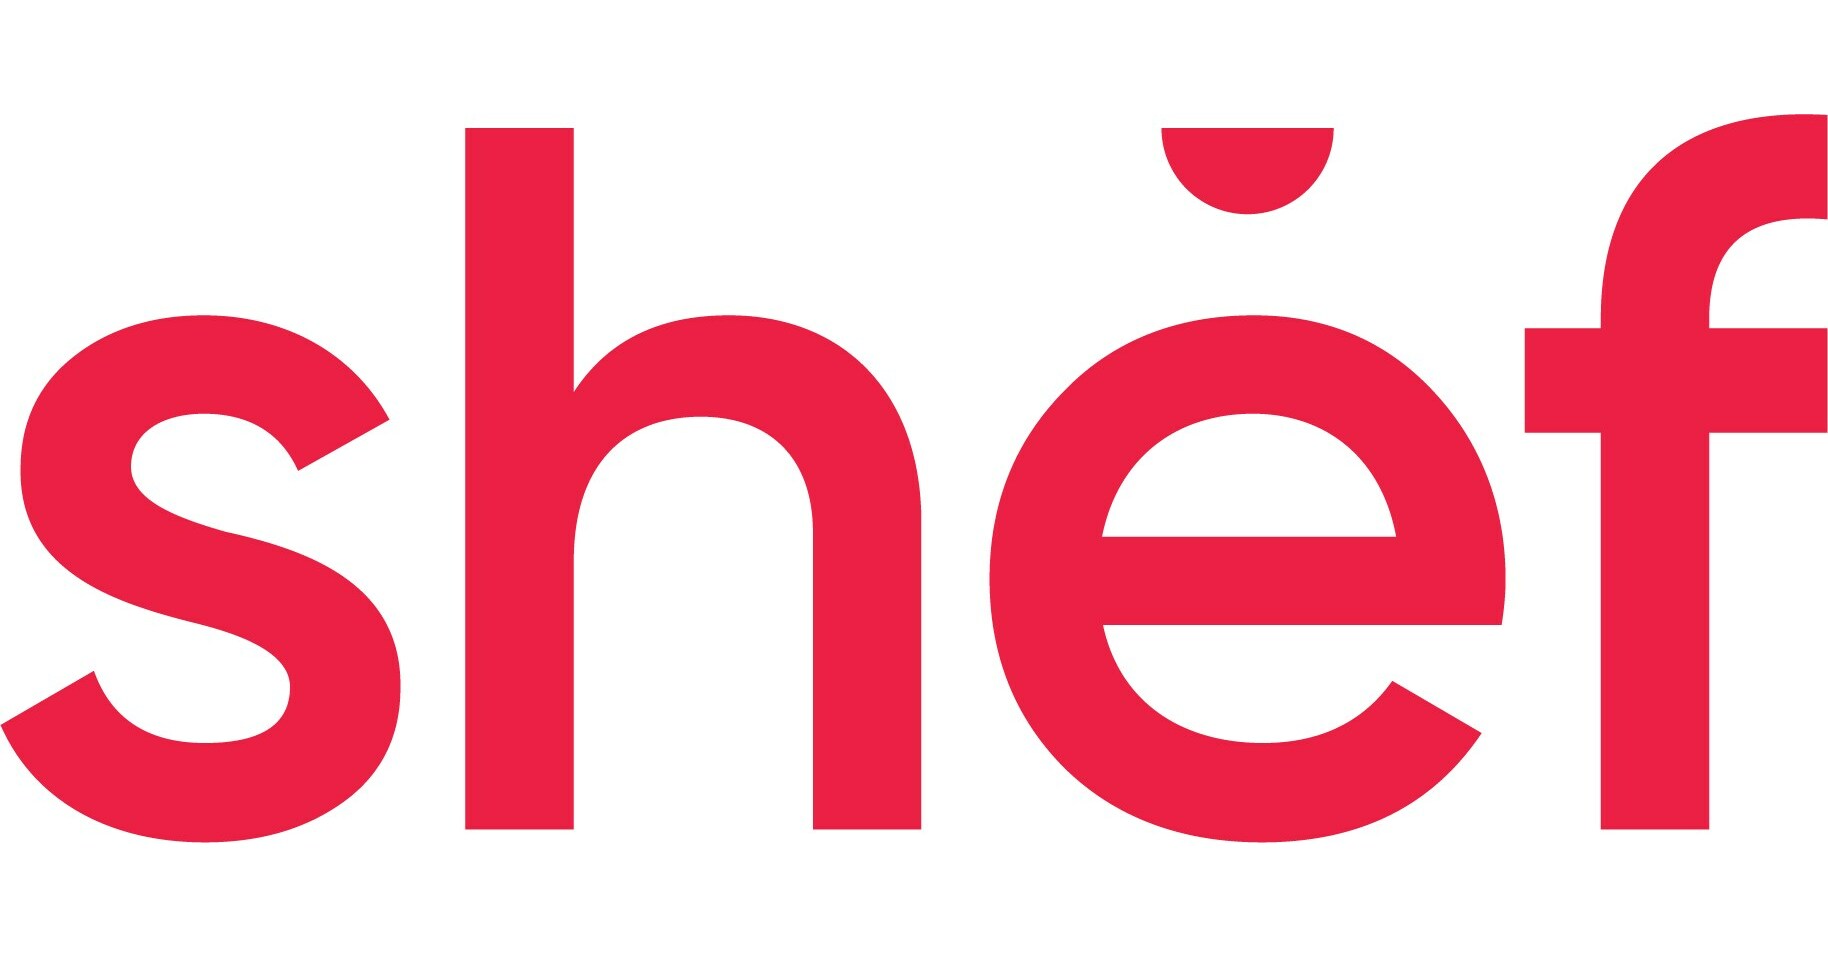 Chef-to-Consumer Marketplace Shef Announces Plans to Expand Nationwide  After $73.5 Million Series B